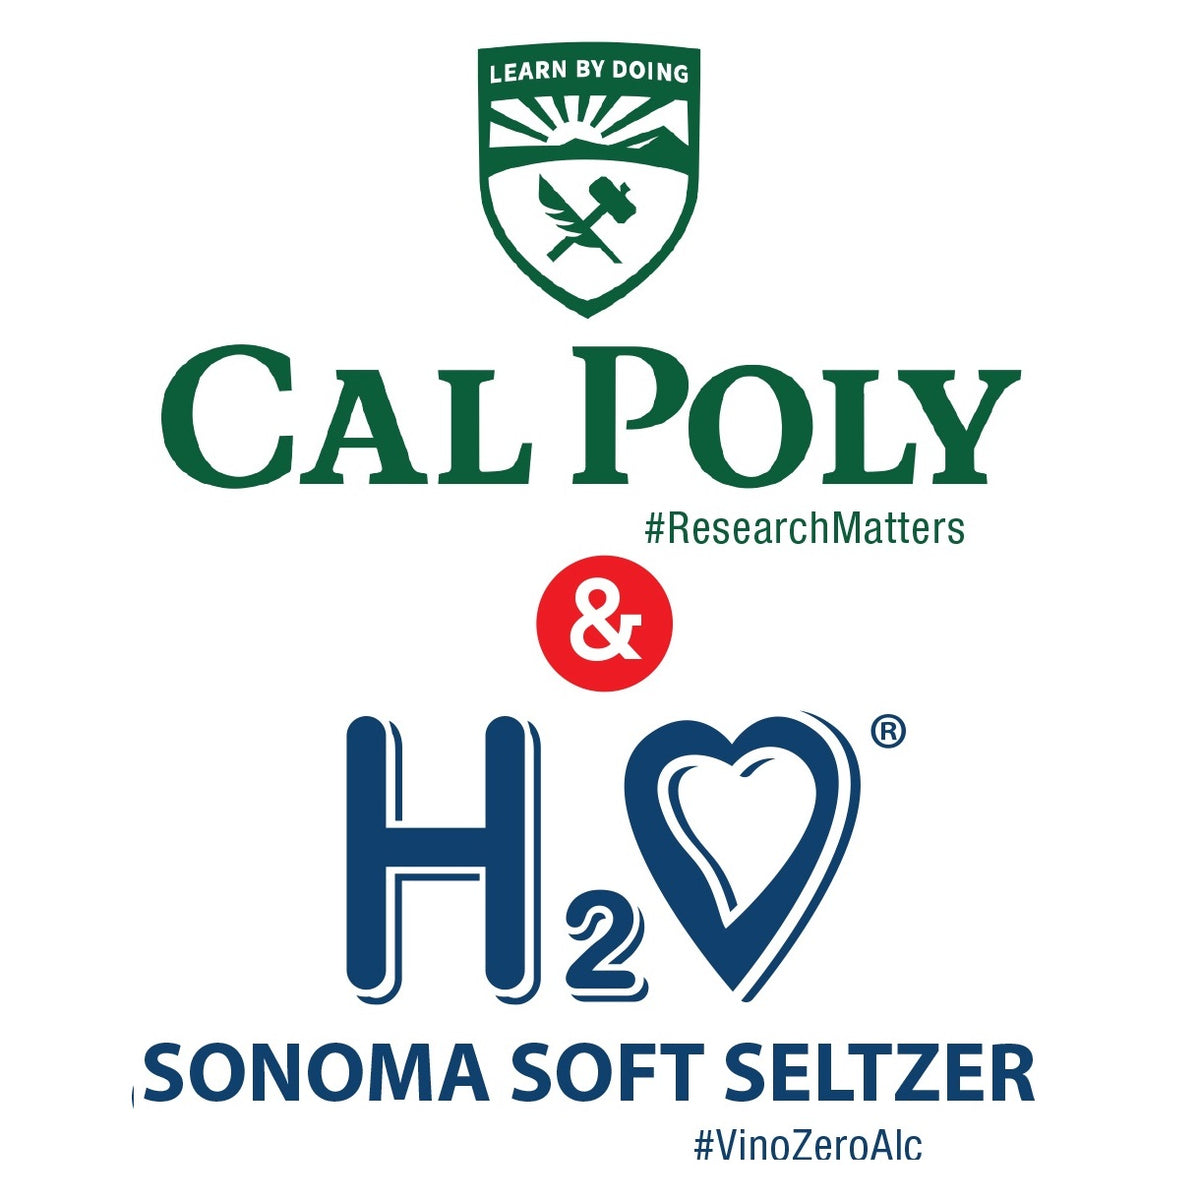 Unlocked in Sonoma | H2o® 0.0% Science Blanc Refreshment, with Soft Beverages Pioneers Alcohol Seltzer ALC. by – ❤ Sauvignon Wine-Infused | 0.0% Sonoma